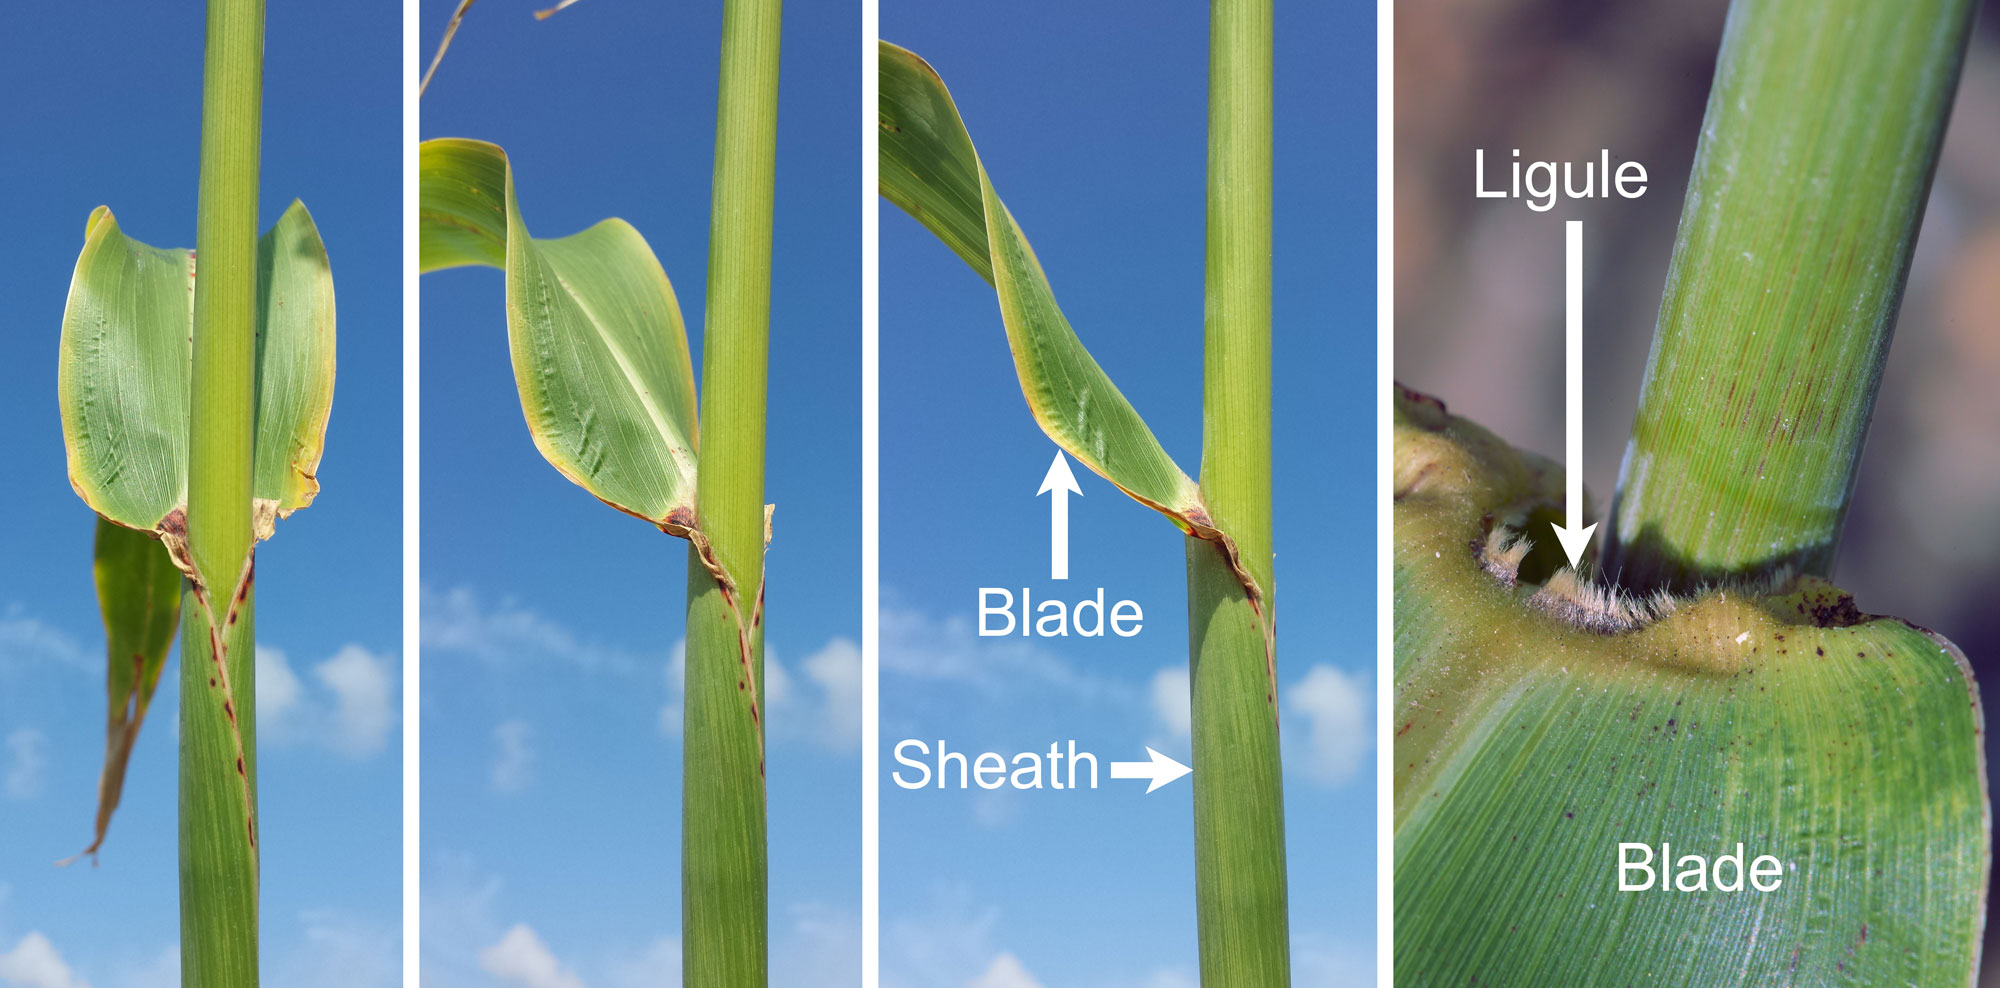 Photographs showing four views of the leaf blade, leaf sheath, and ligule of sorghum. The junction between the blade and the sheath is shown in three views in the three left panels. In the fourth panel, the blade has been pulled down and the sheath pulled slightly away from the stem to expose the short hairs of the ligule.